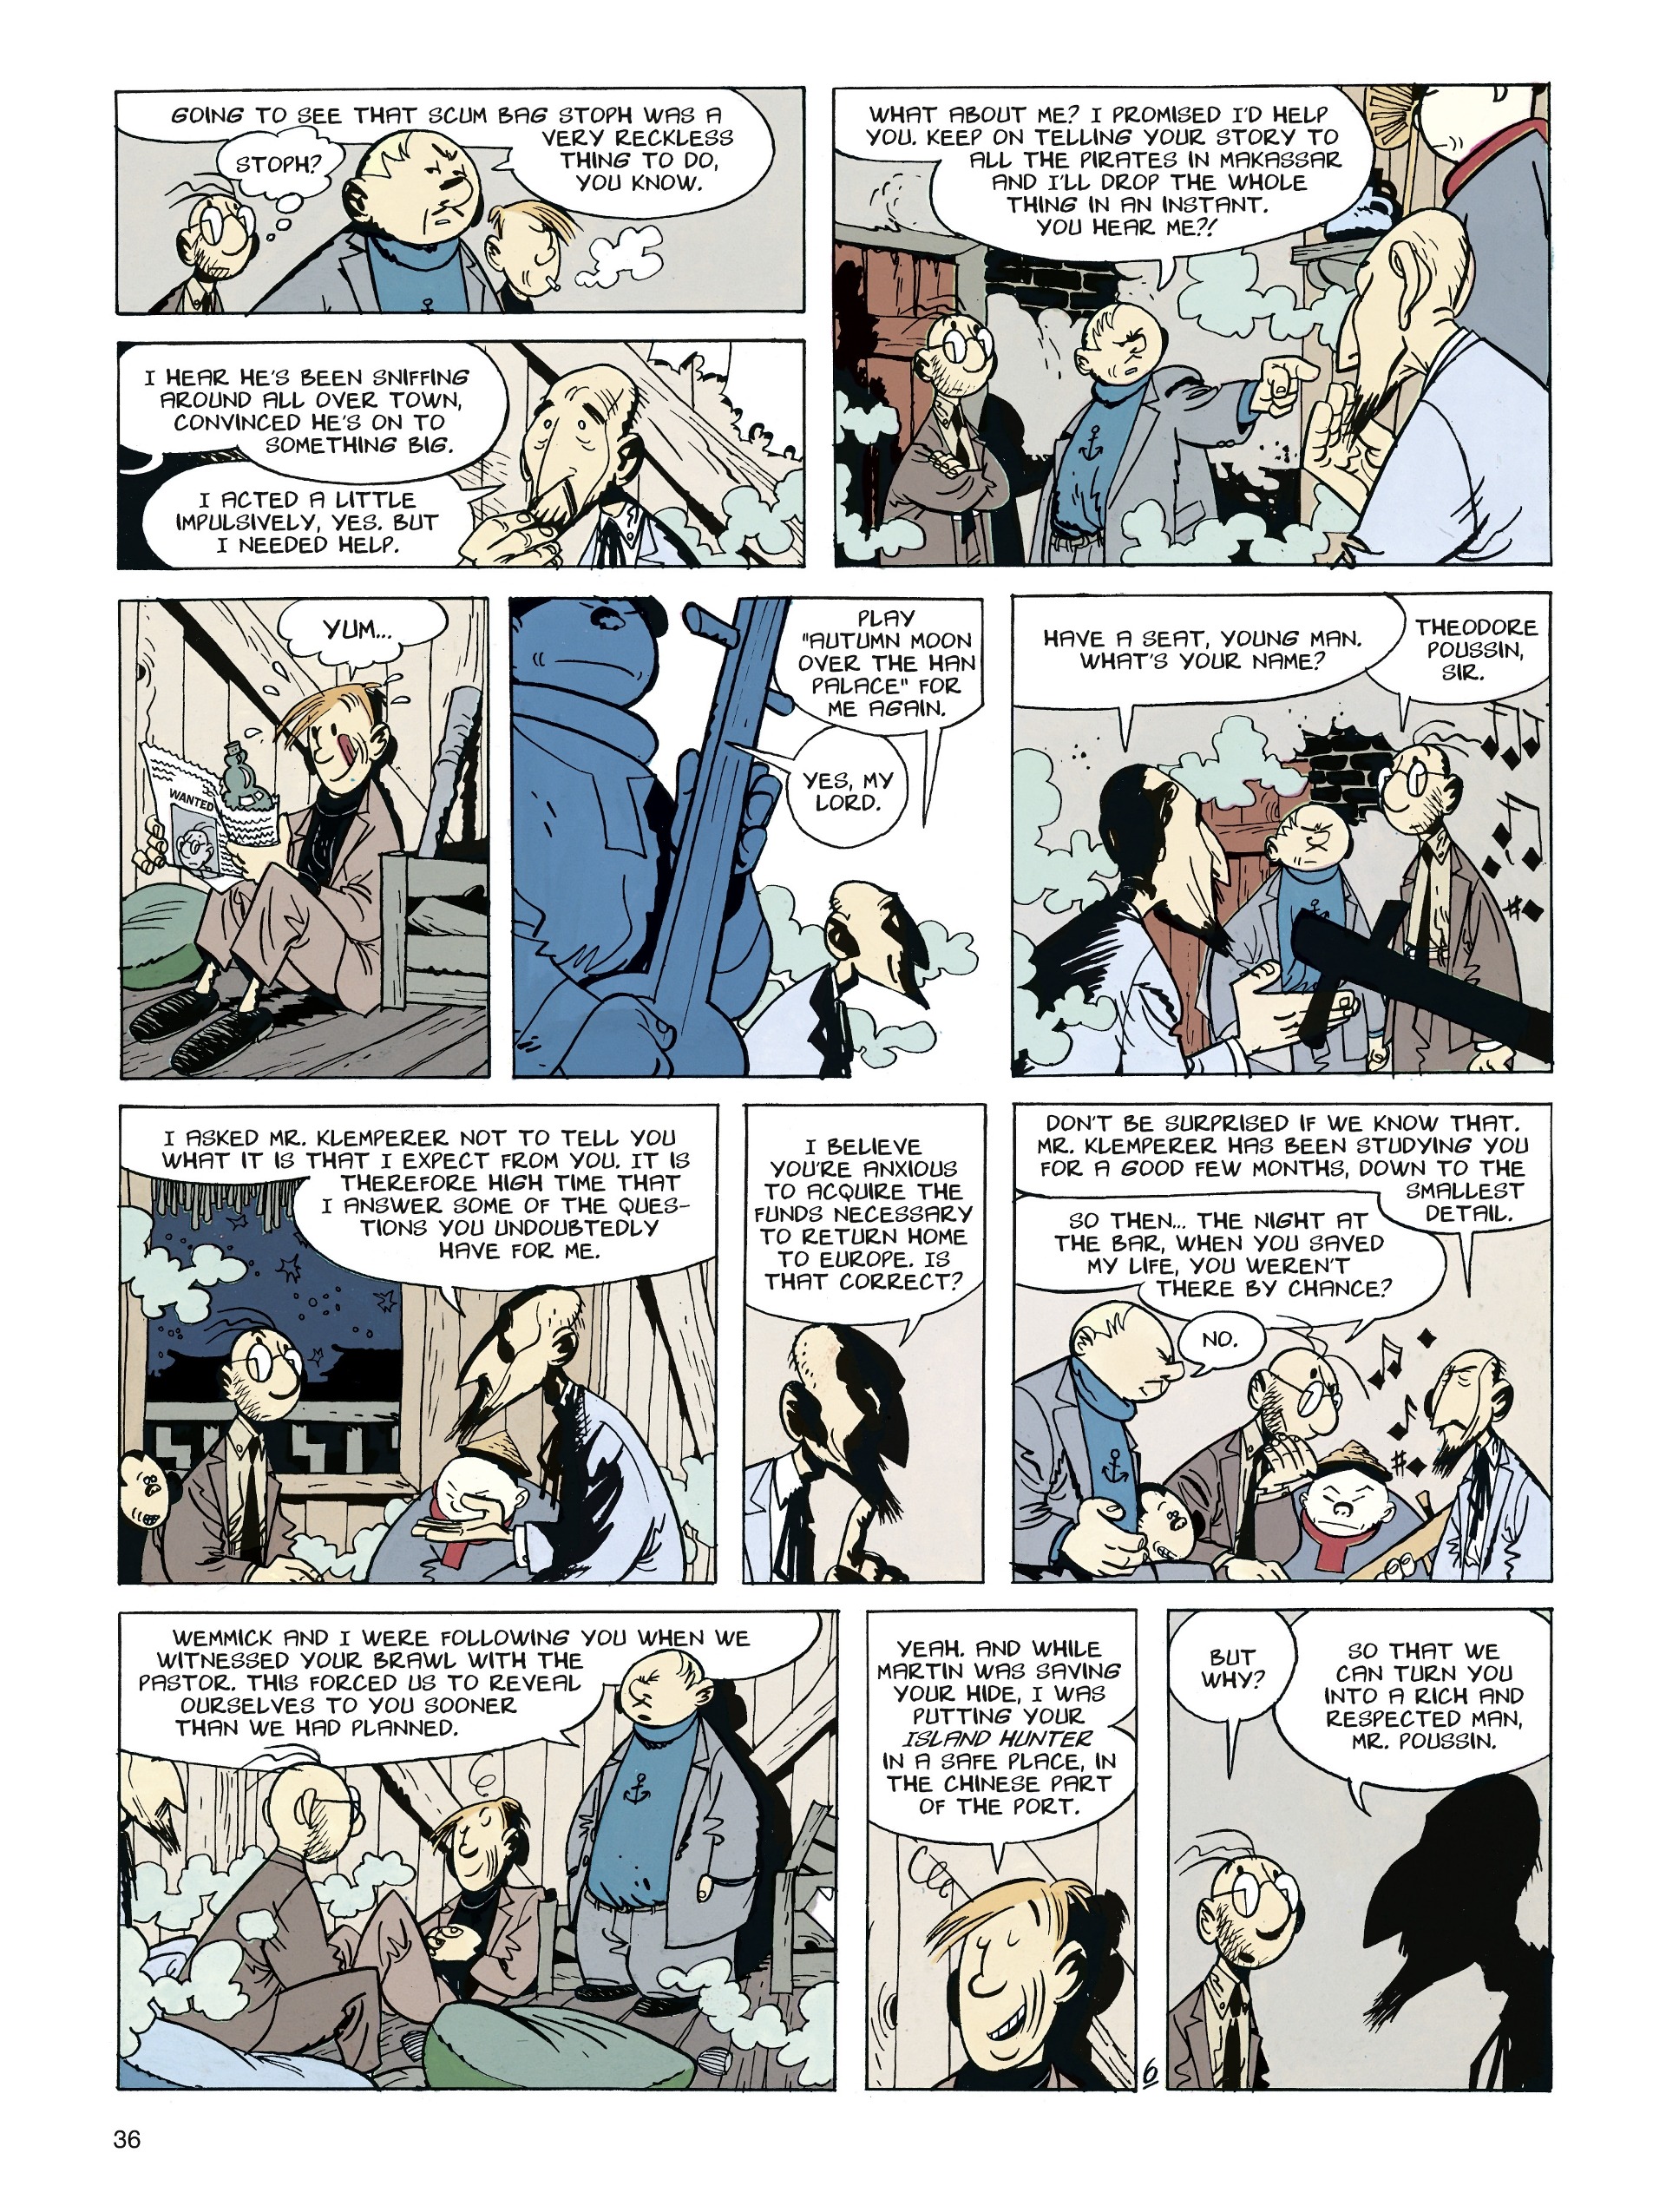 Read online Theodore Poussin comic -  Issue #2 - 36